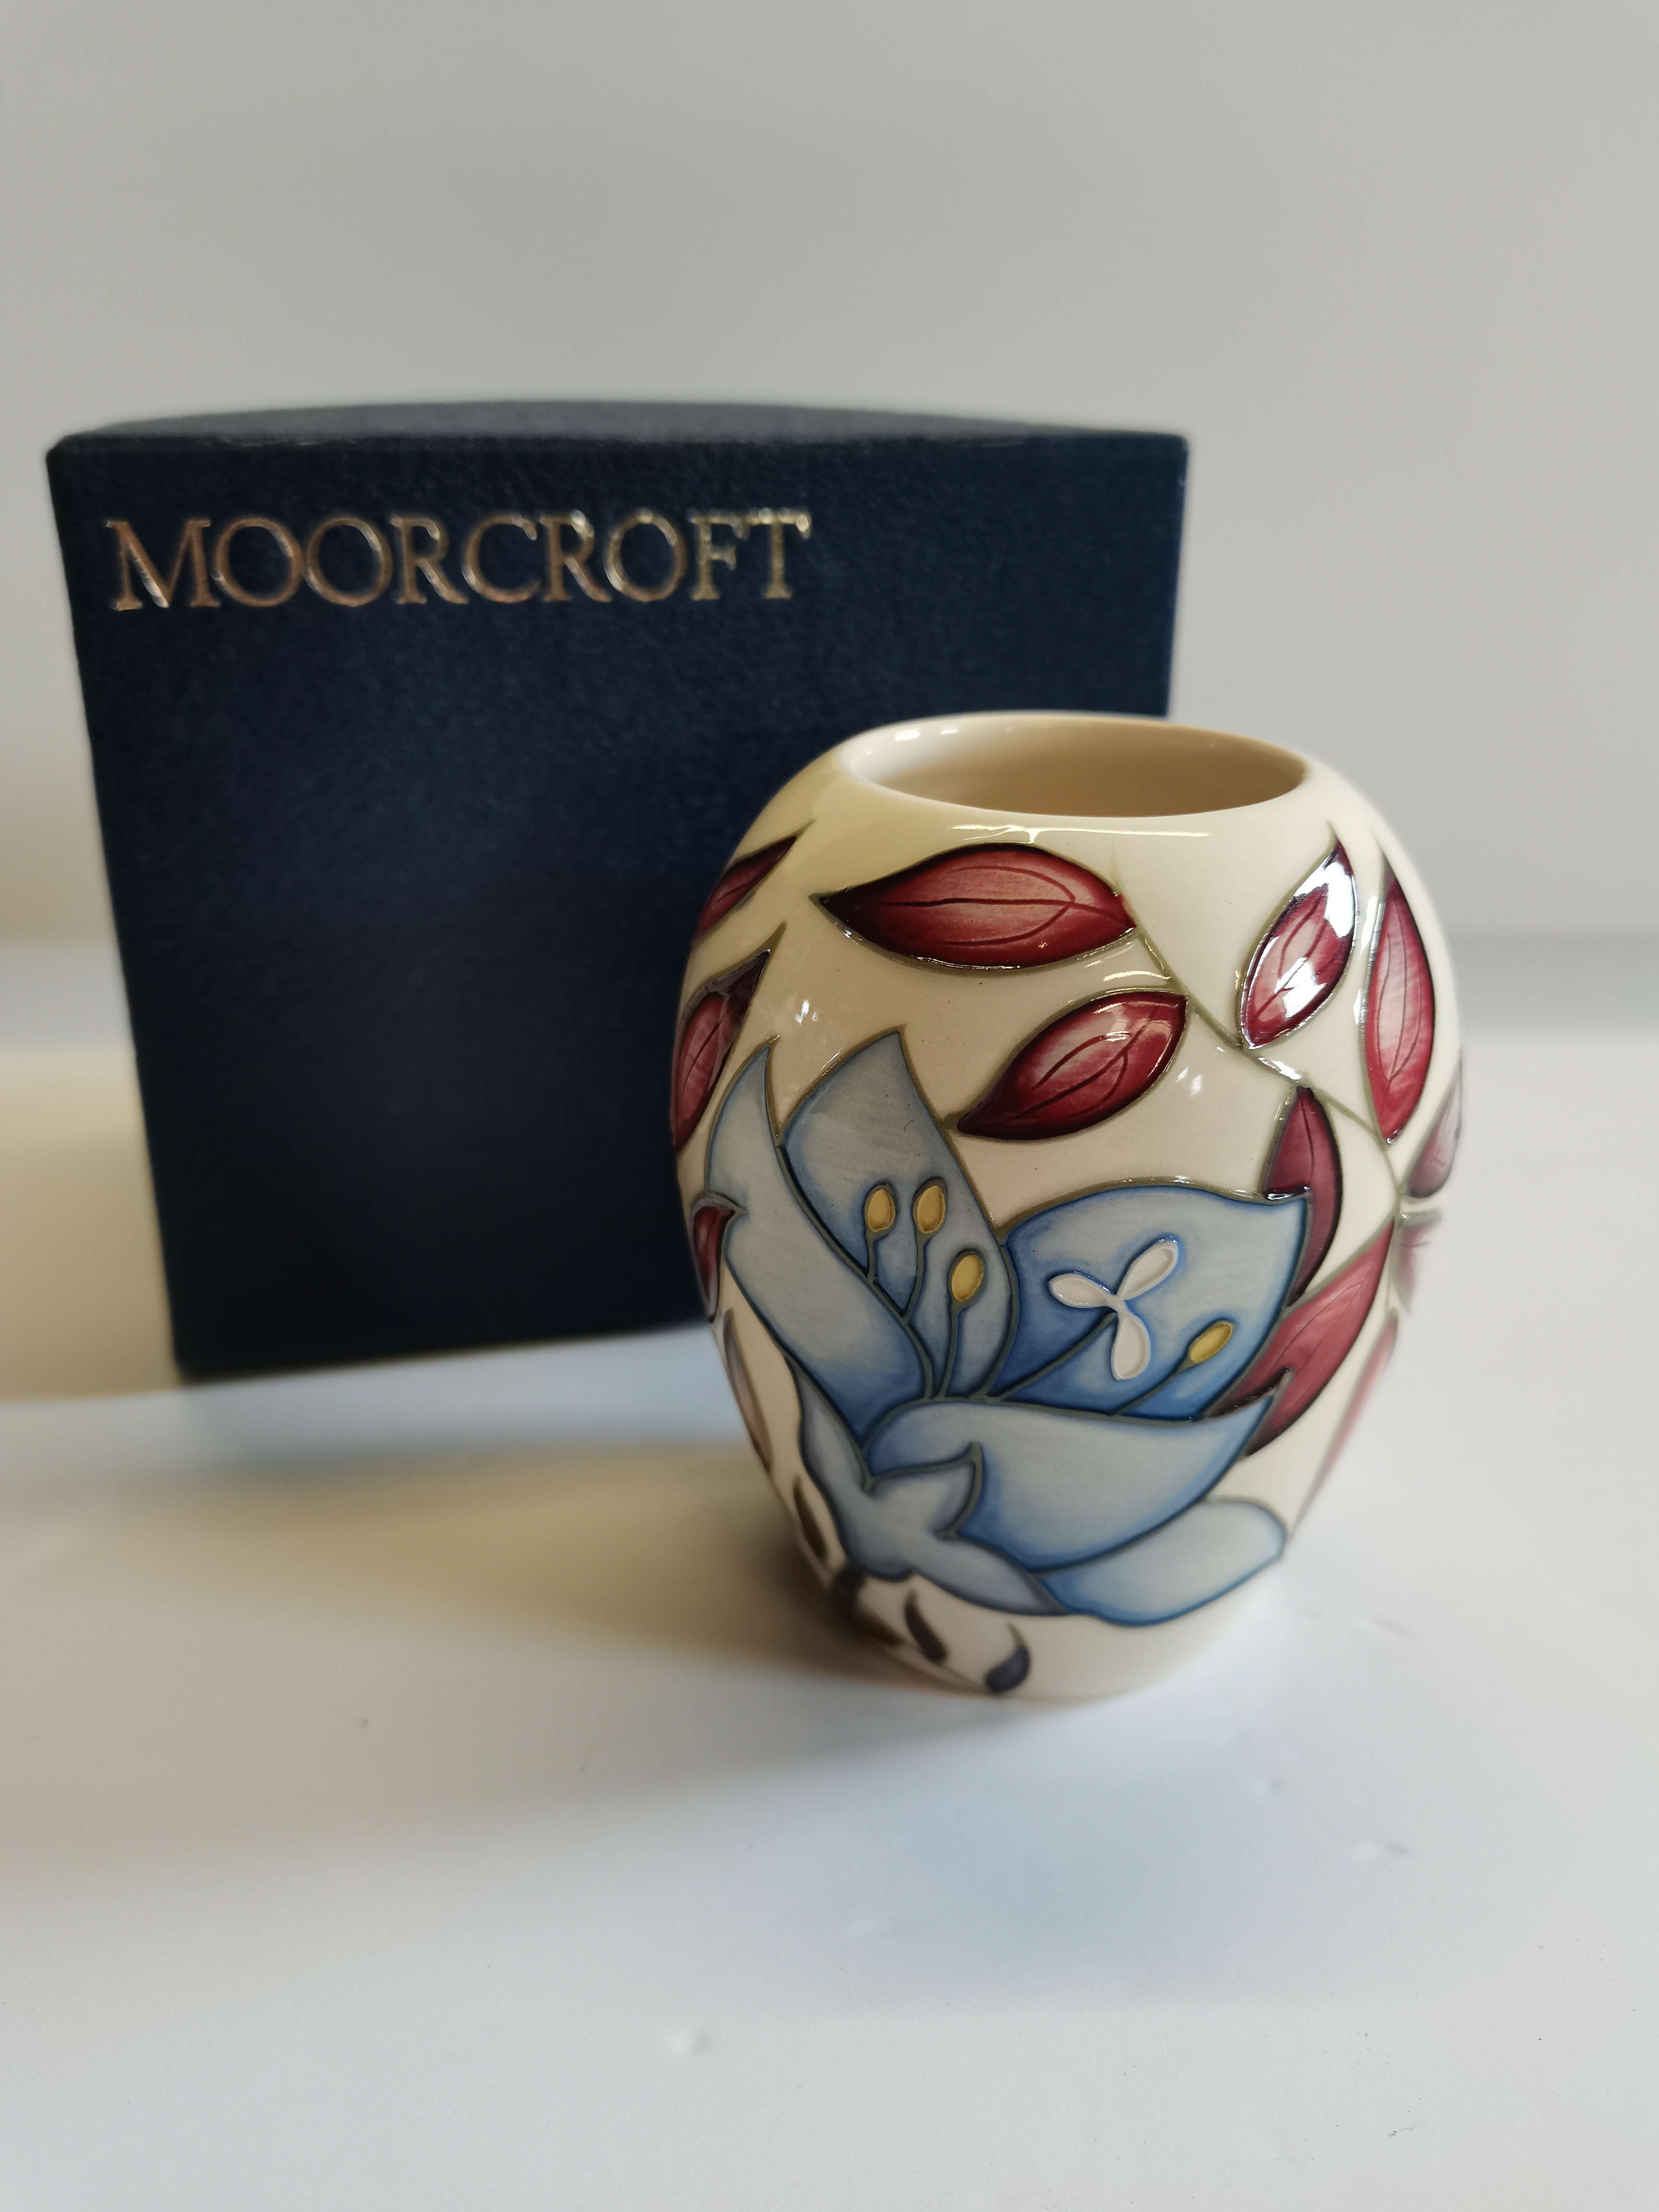 Moorcroft Jacobs Ladder Vase designed by Alicia Amison Hx9.5cm excellent condition with box - Image 2 of 3